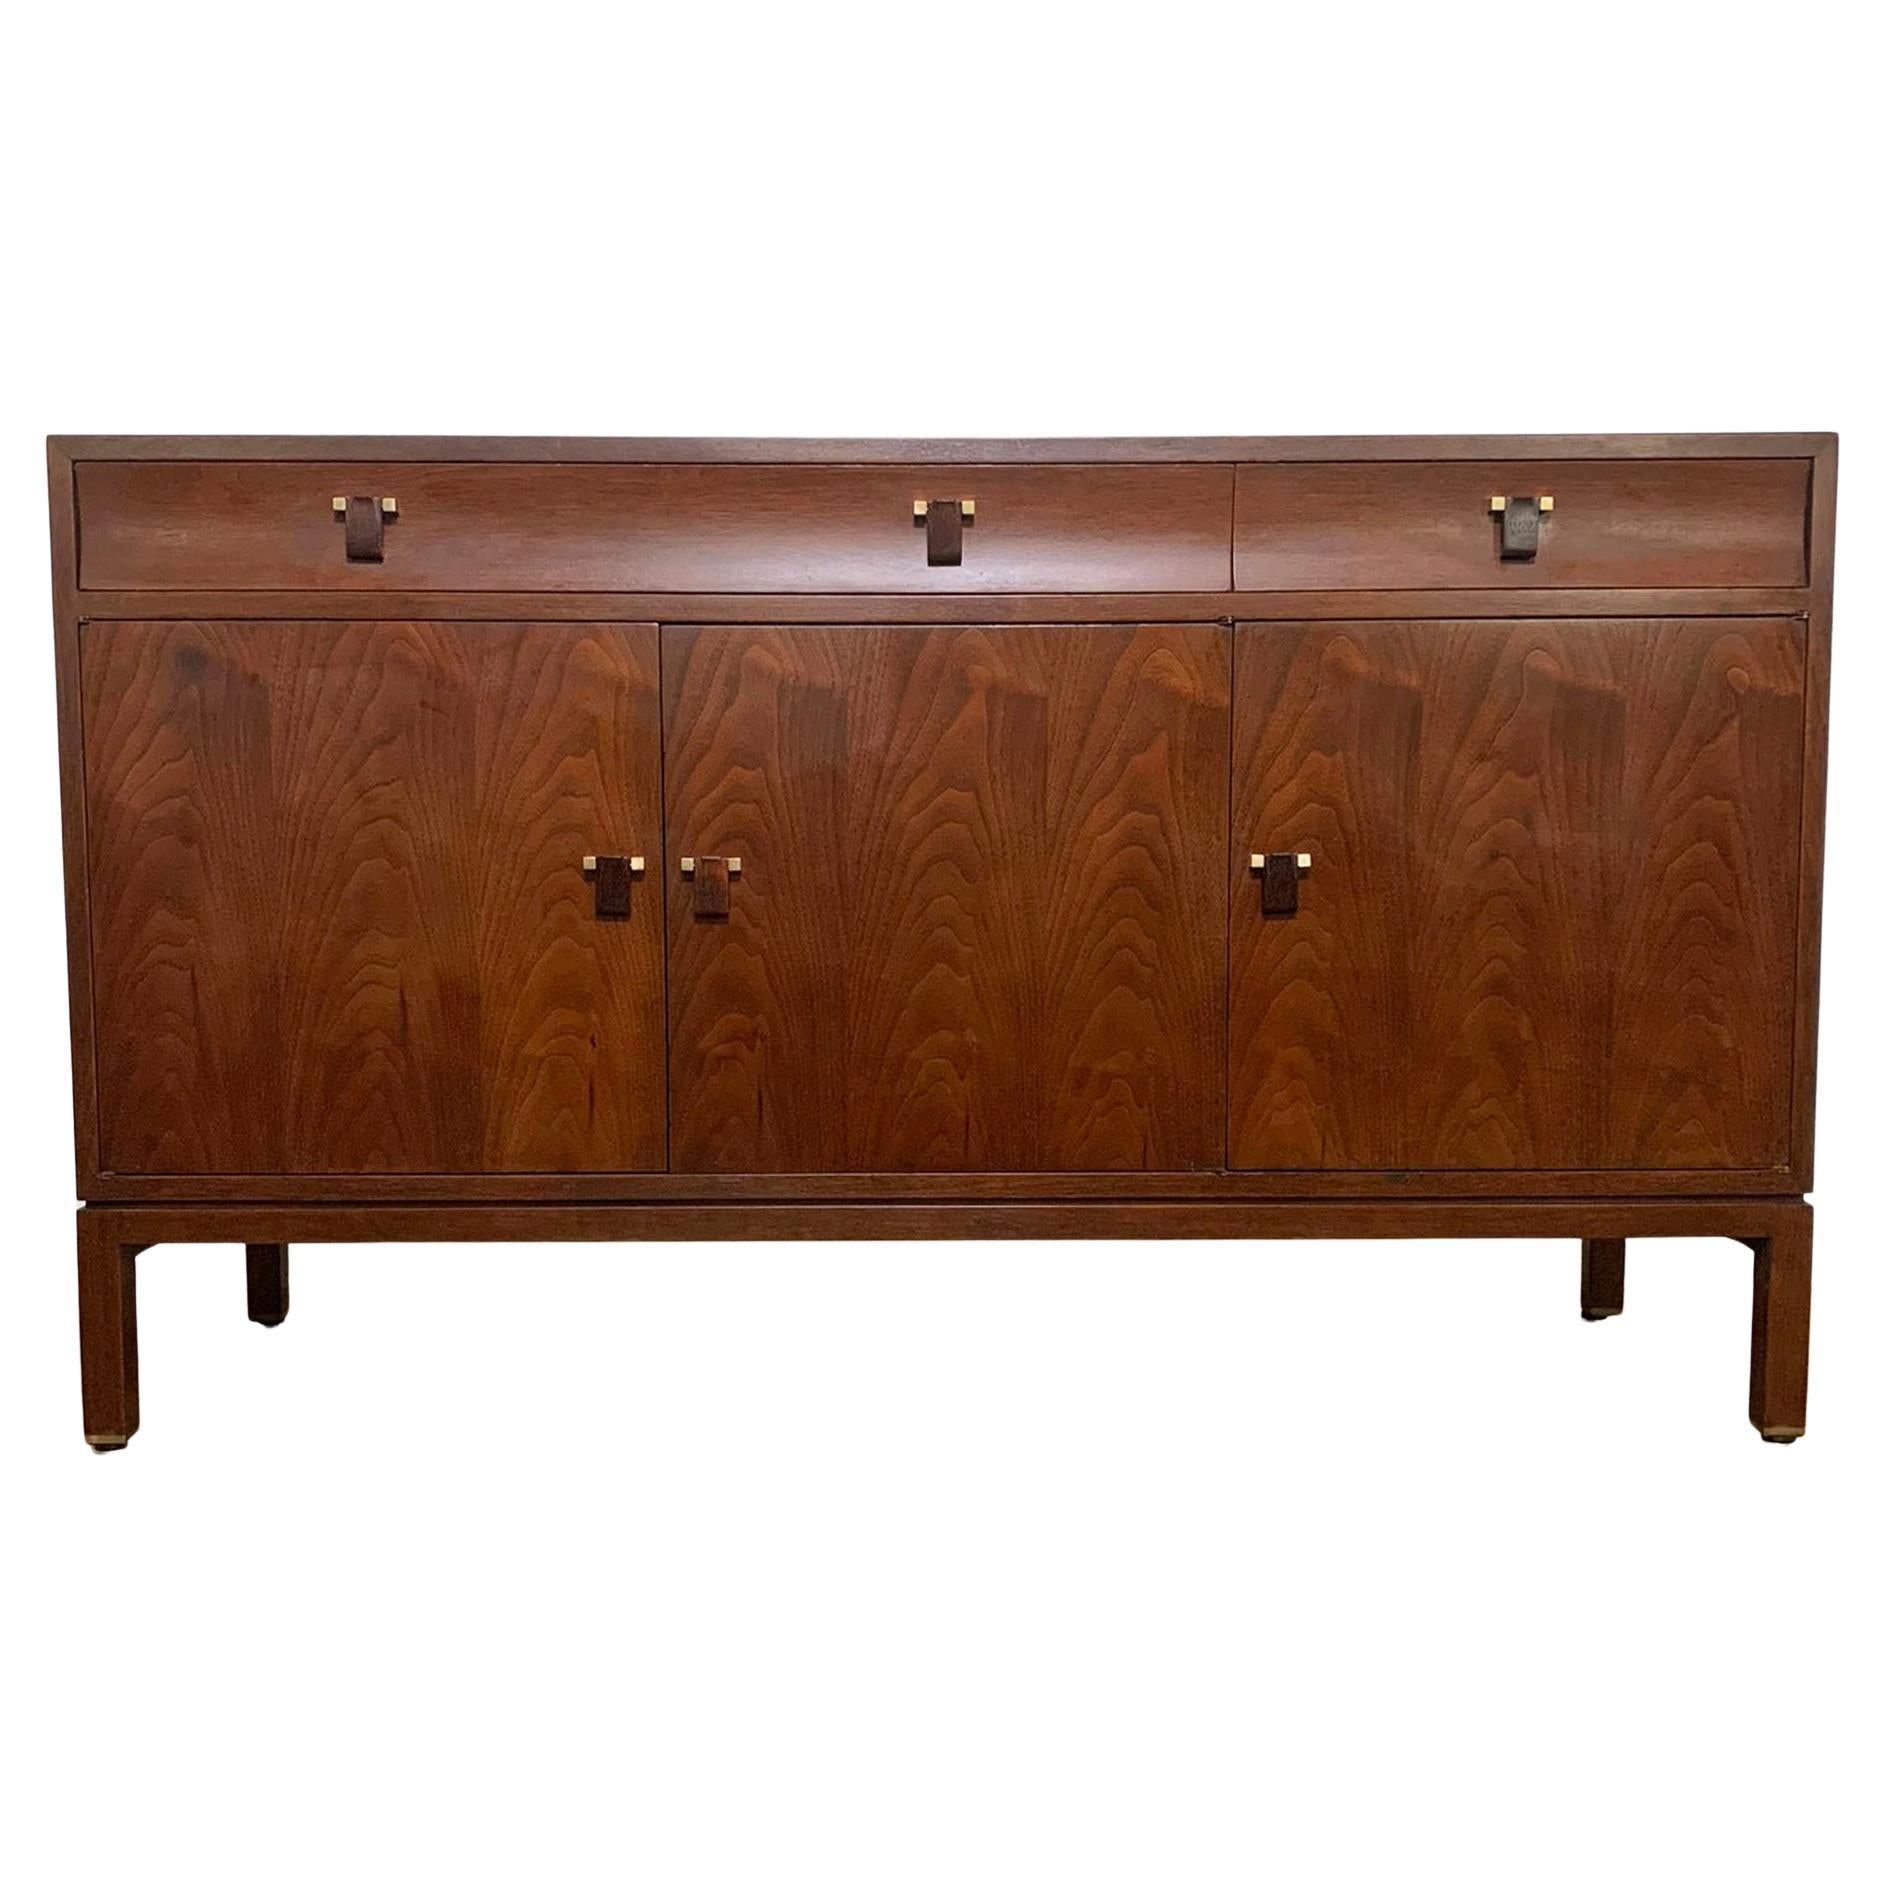 Edward Wormley for Dunbar Mahogany Credenza with Rosewood Pulls, circa 1950s For Sale